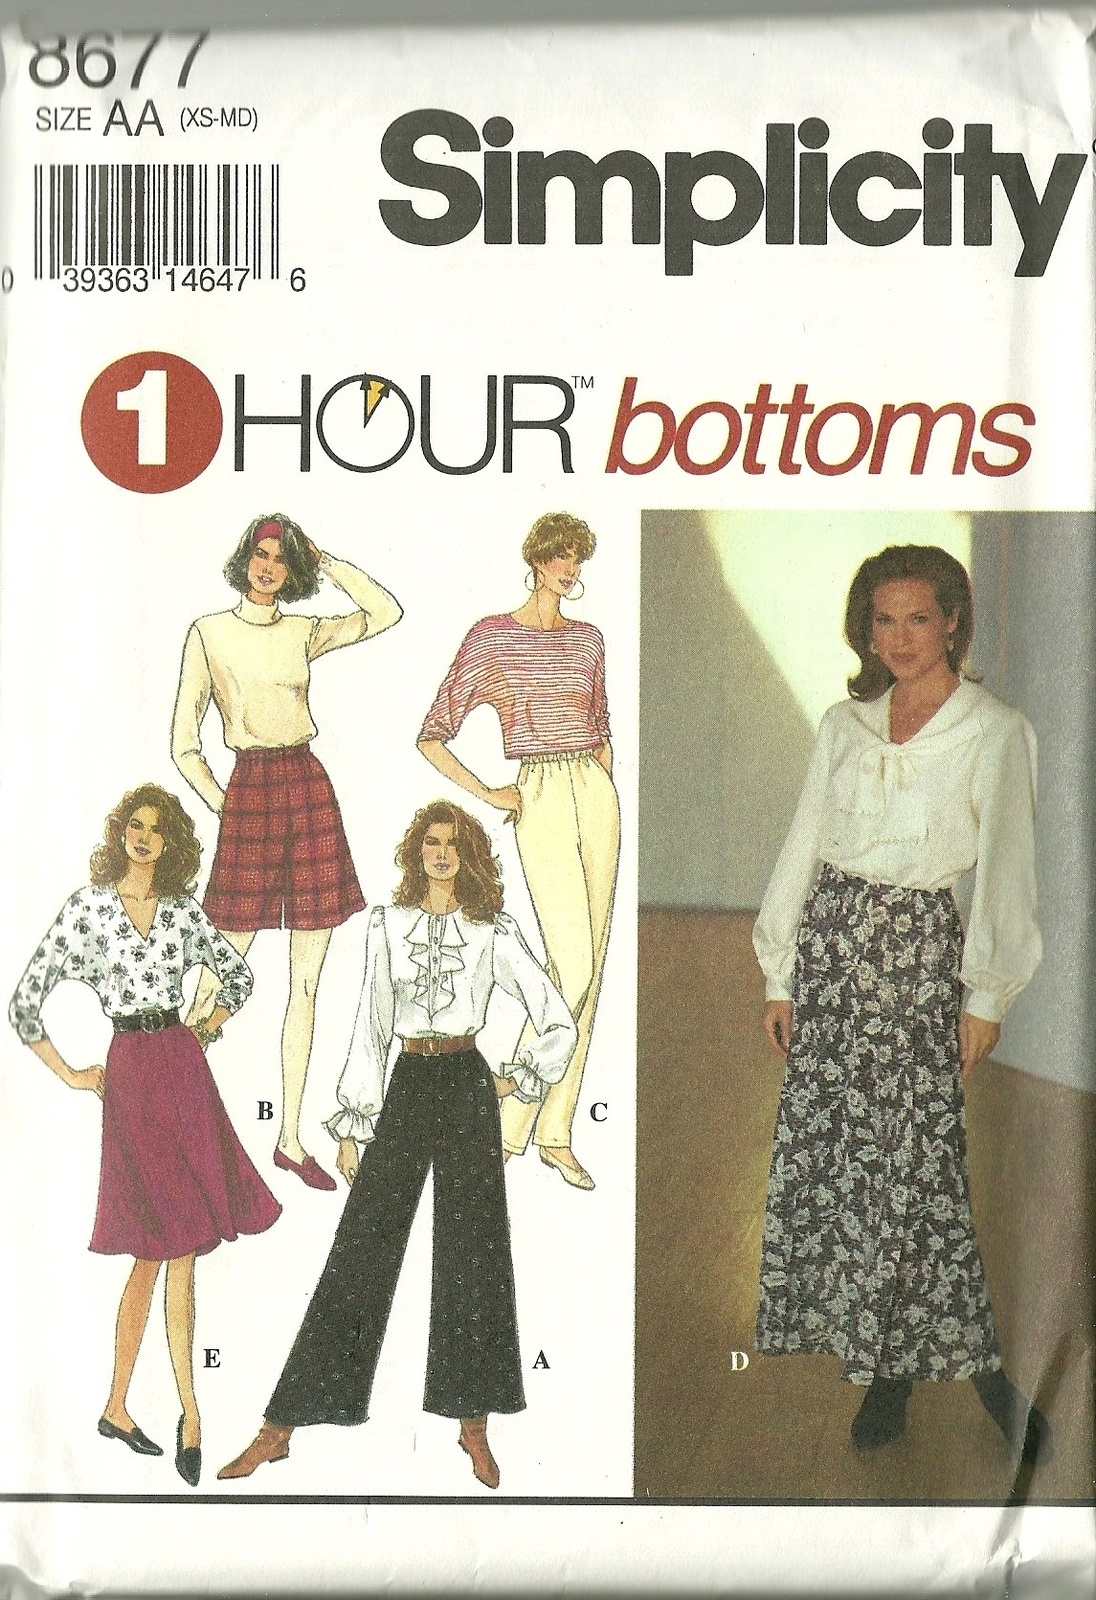 Simplicity Sewing Pattern 8677 Misses Skirt Pants Shorts 6 8 10 12 14 16 New - $9.99